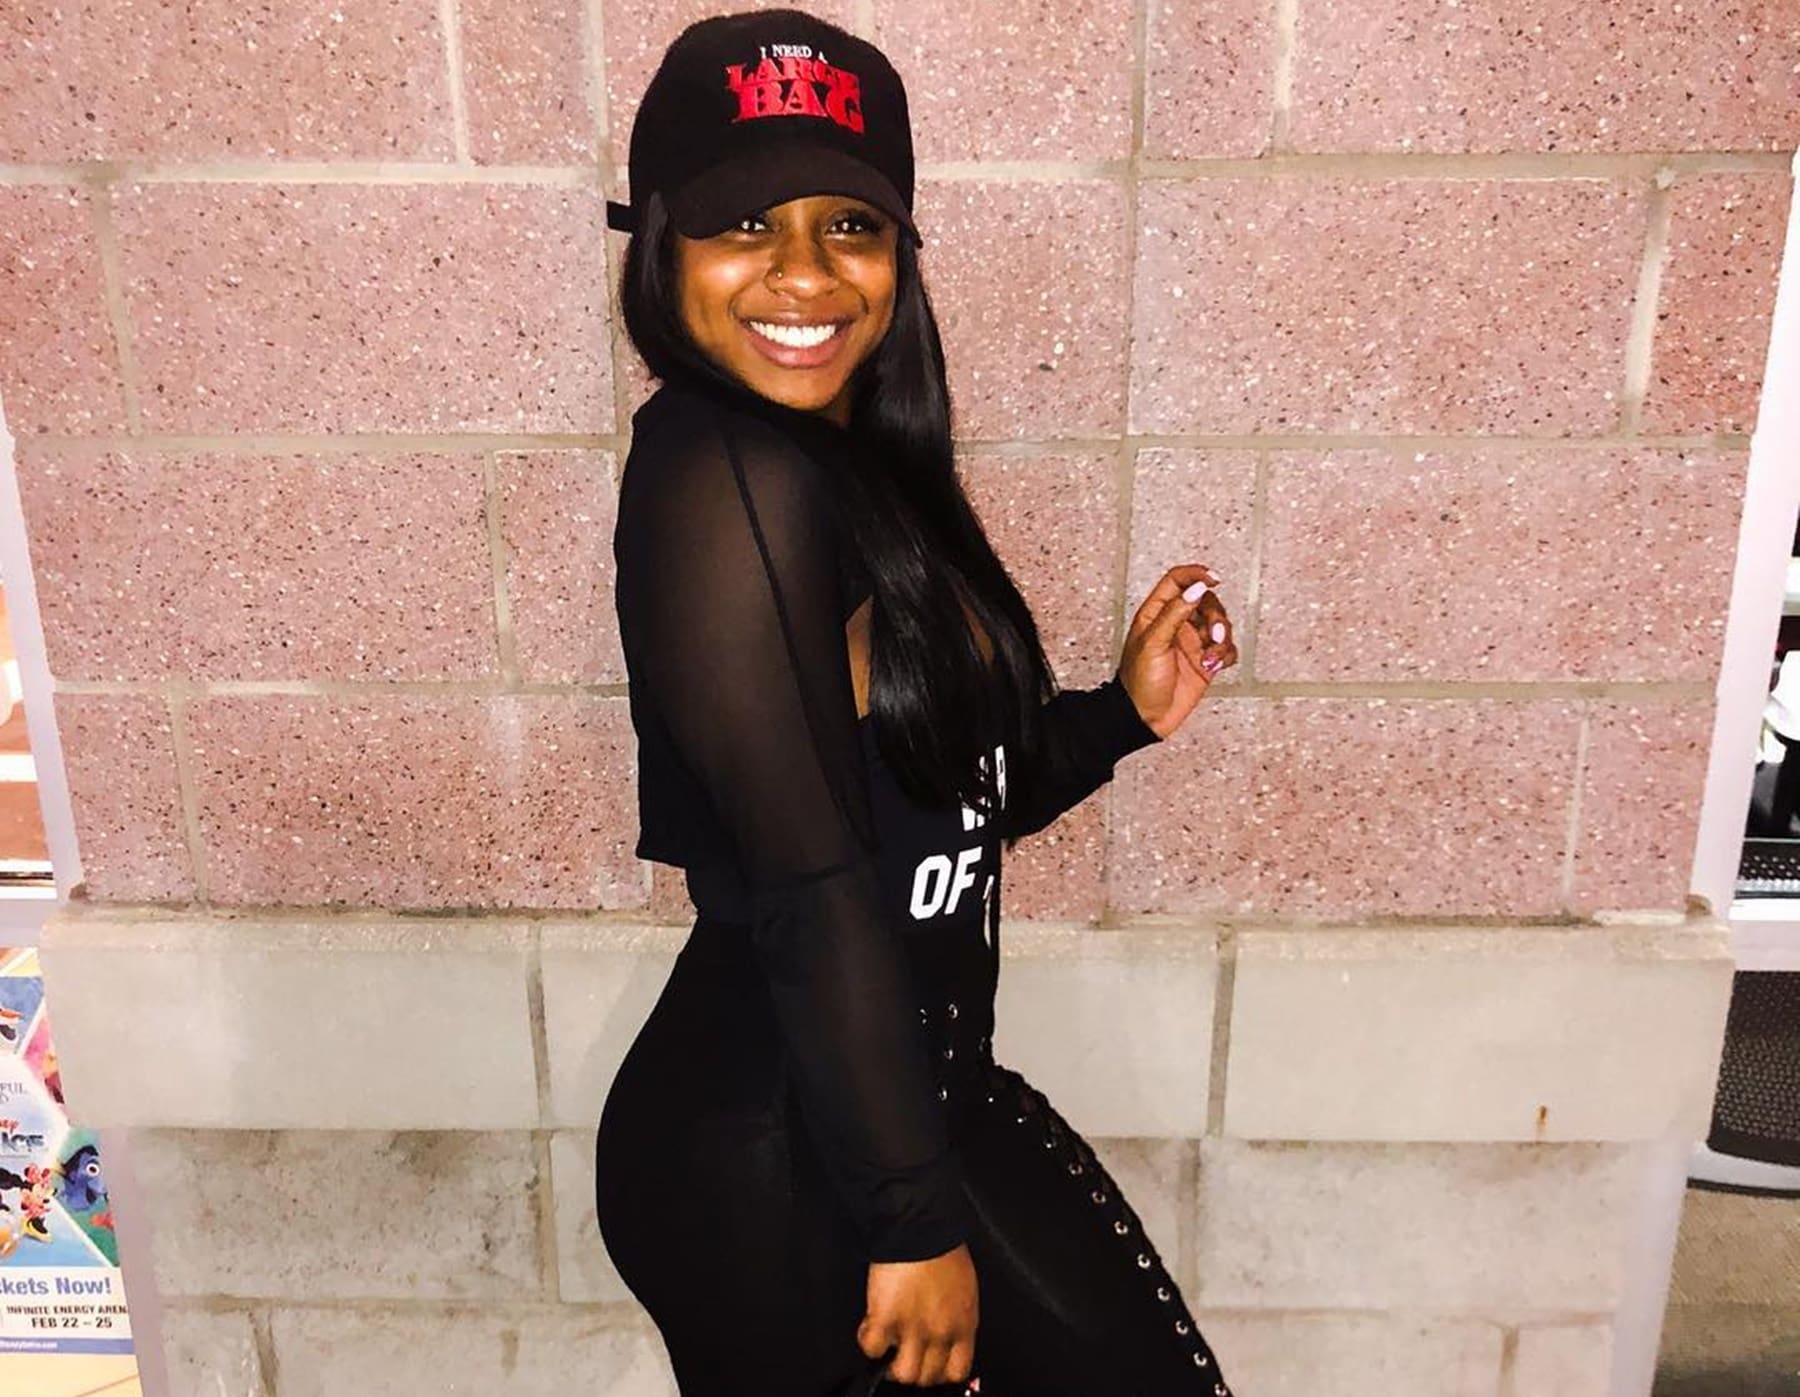 Reginae Carter And Angela Simmons Are Twinning In The Same Outfit - Who Rocked It Better?